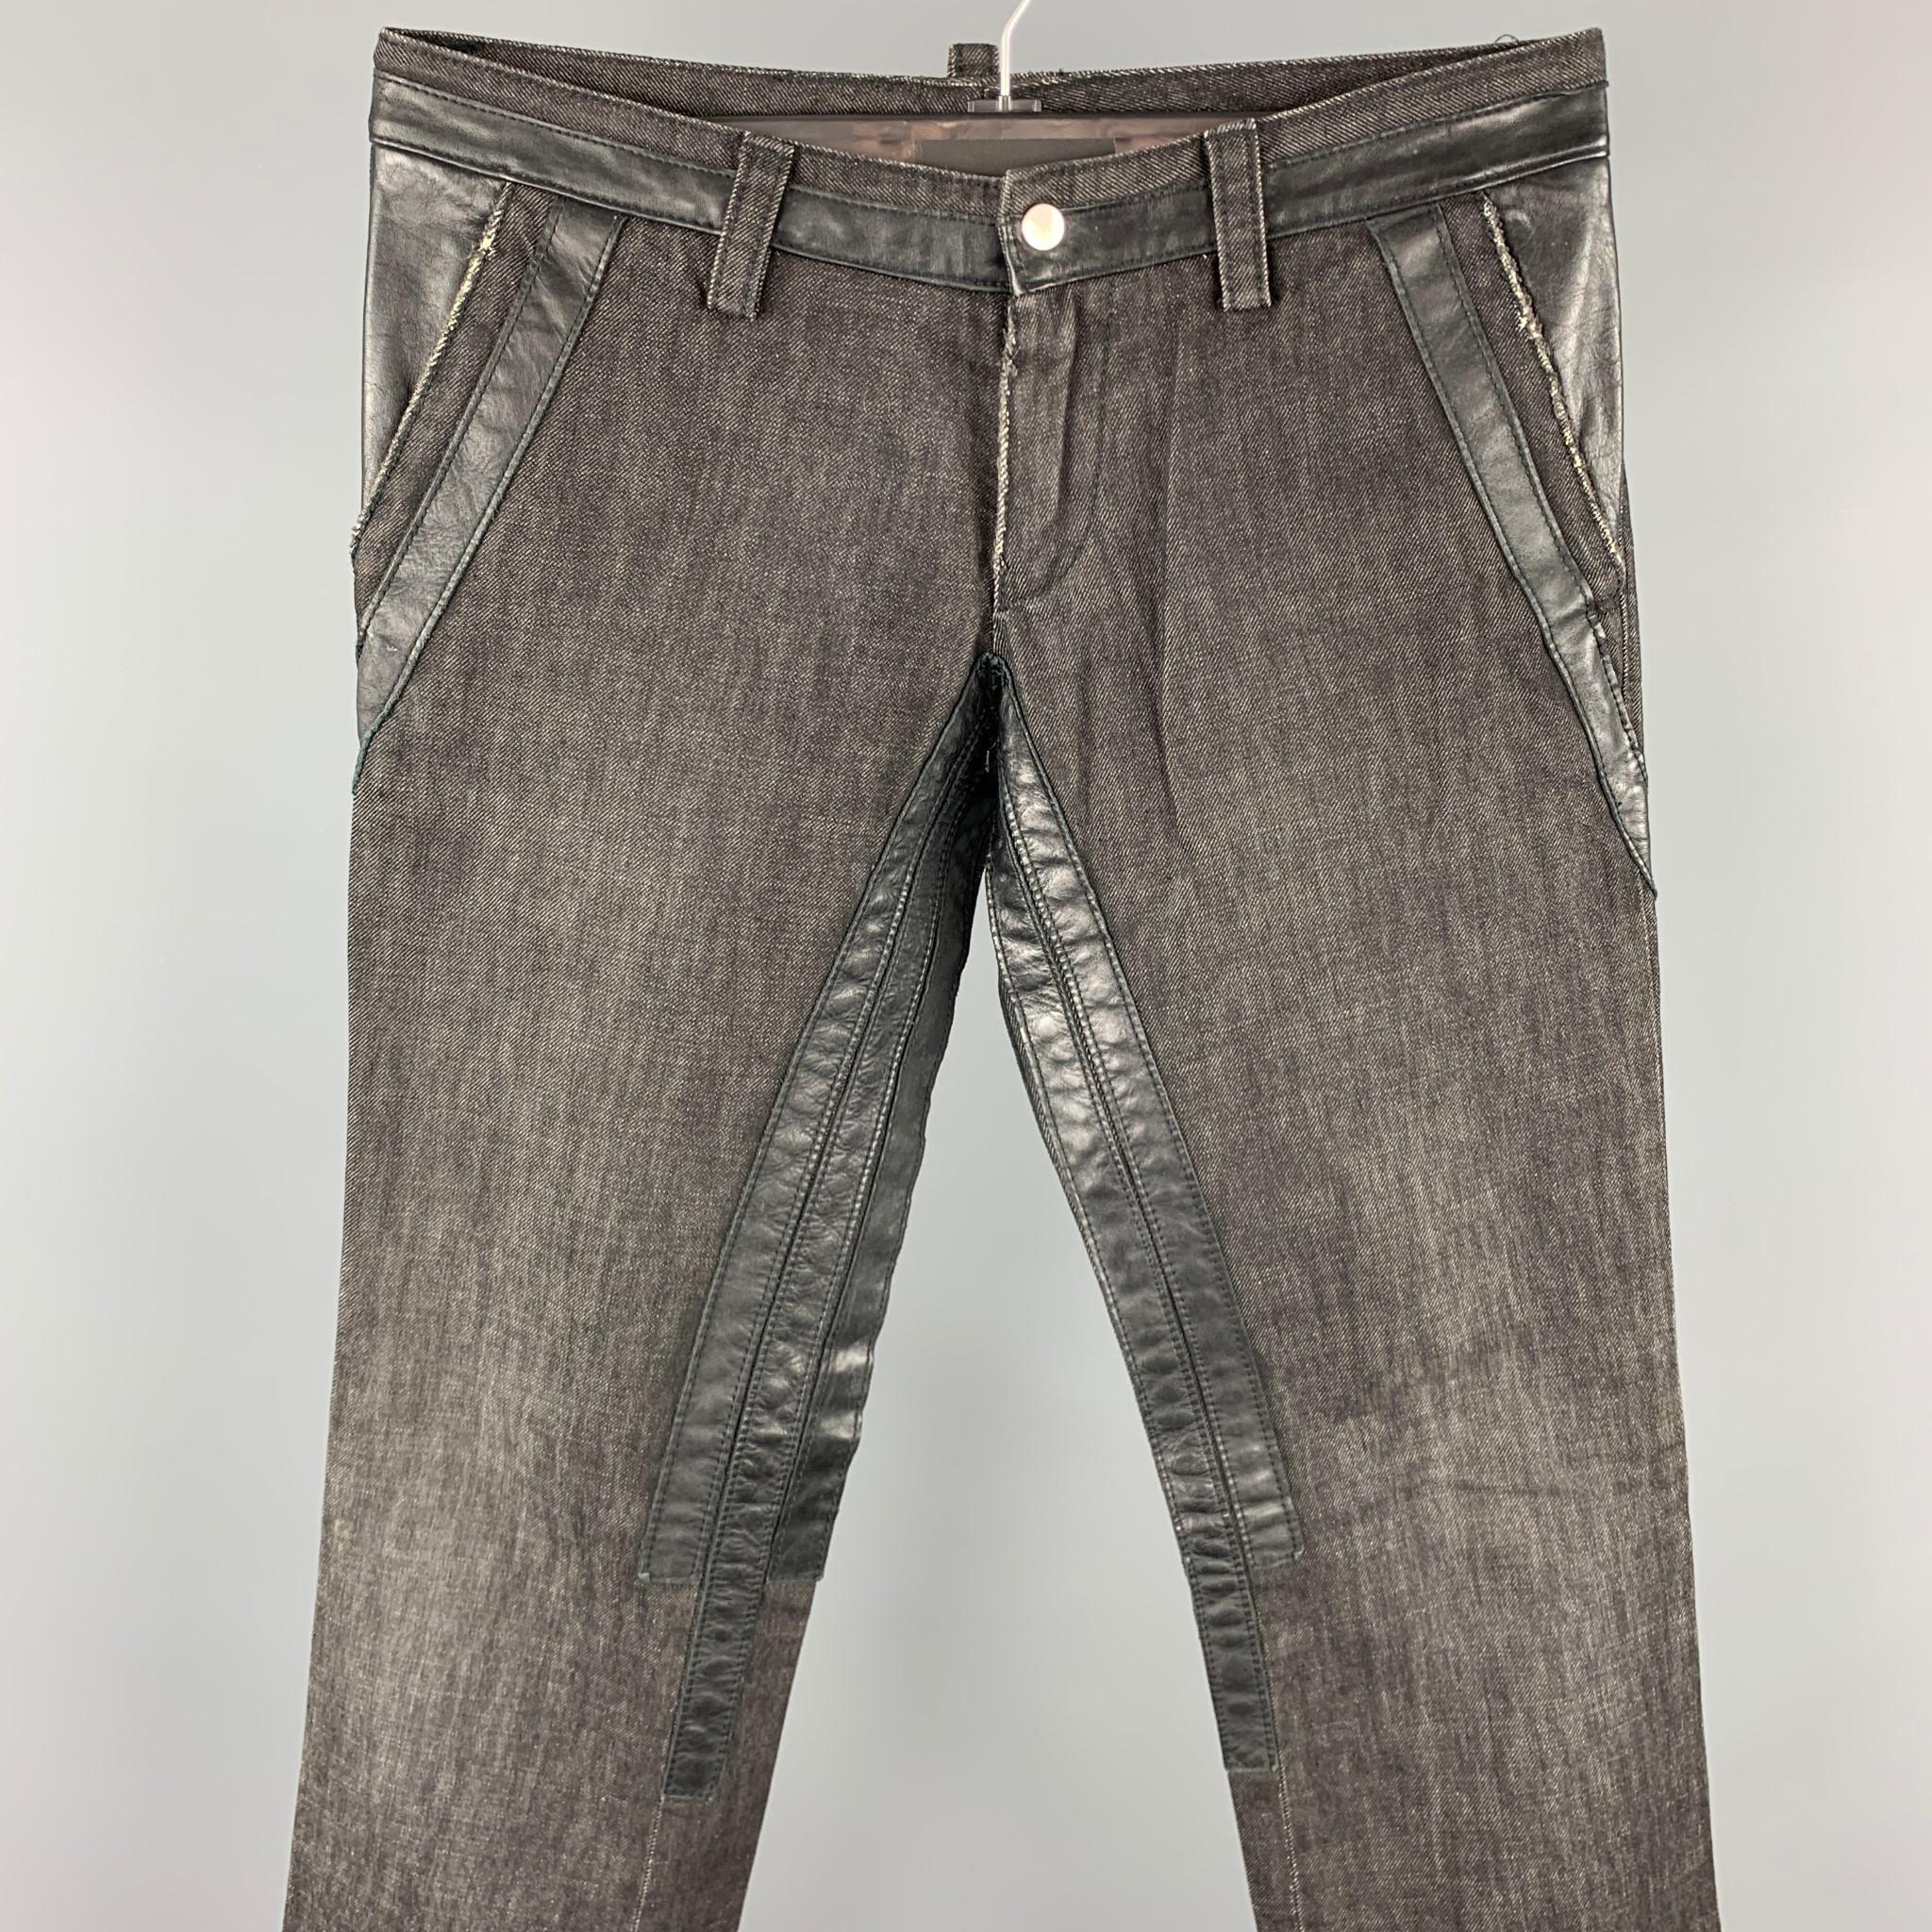 DSQUARED2 jeans comes in a black cotton with leather trim details featuring a straight leg, pocket details, and a zip fly closure. Made in Italy.

Very Good Pre-Owned Condition.
Marked: IT 48

Measurements:

Waist: 32 in.
Rise: 8 in.
Length: 34 in.